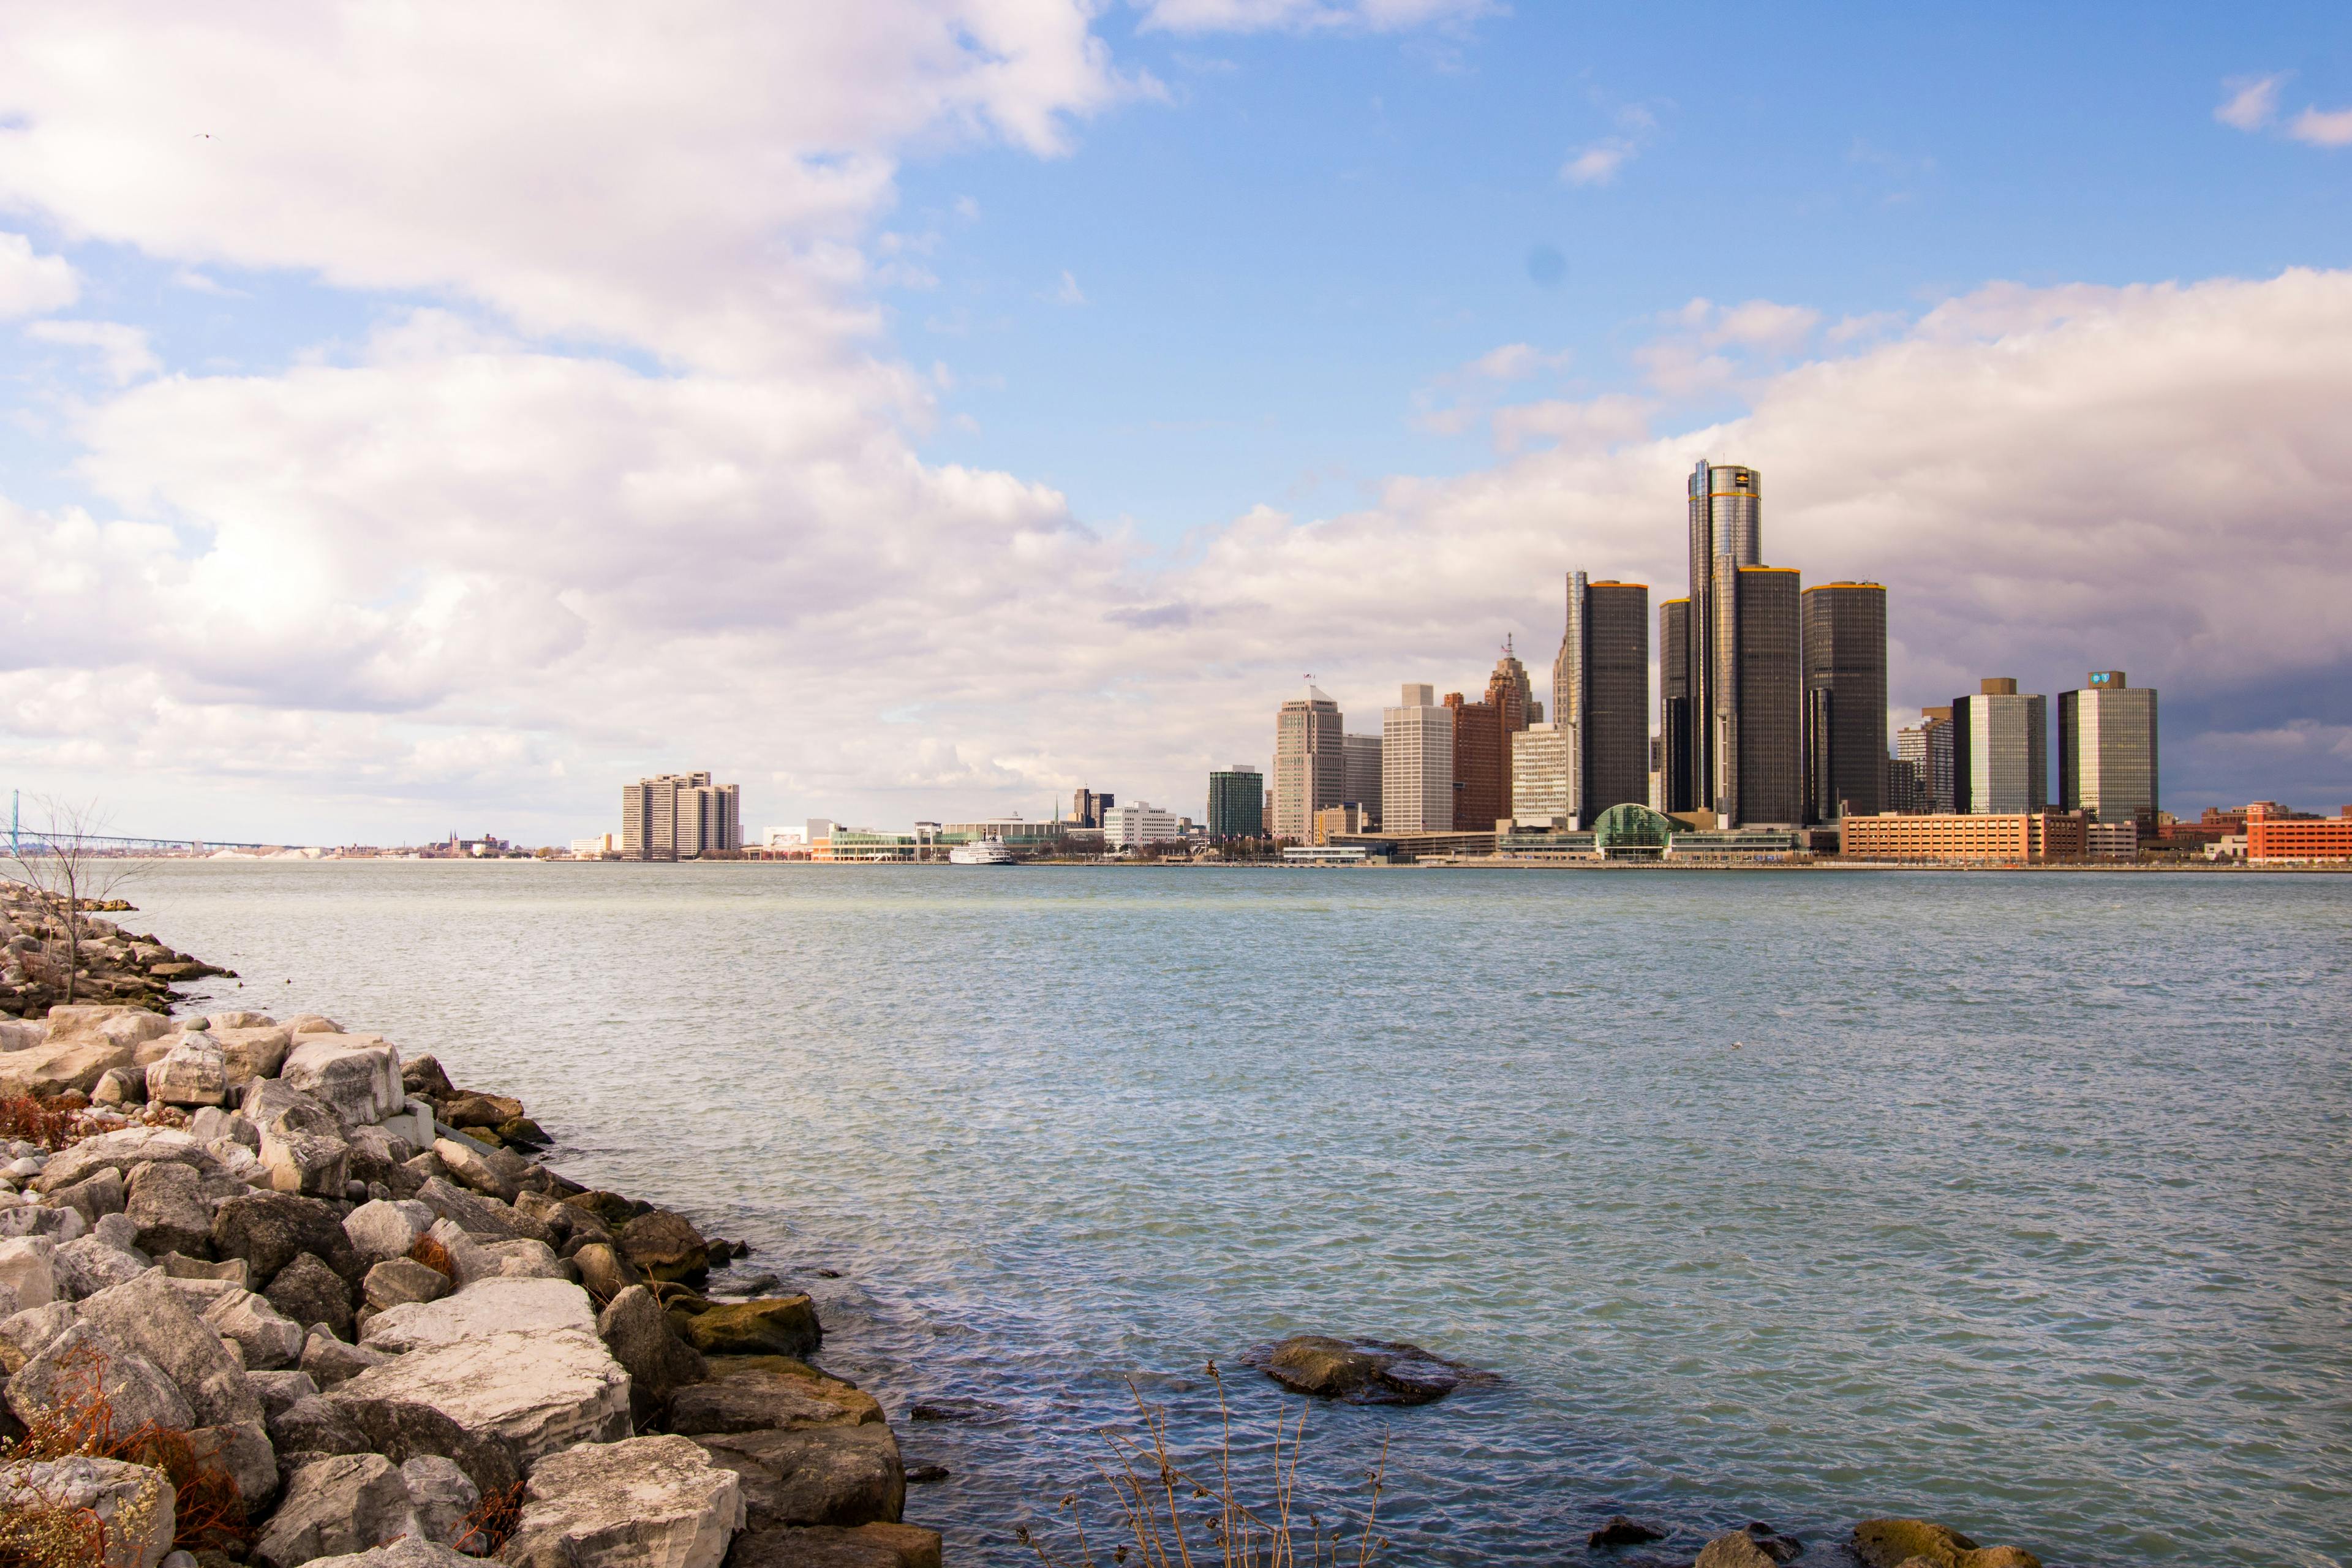 Photo of the Detroit skyline from across the shoreline. Photo by Anon from Pexels.